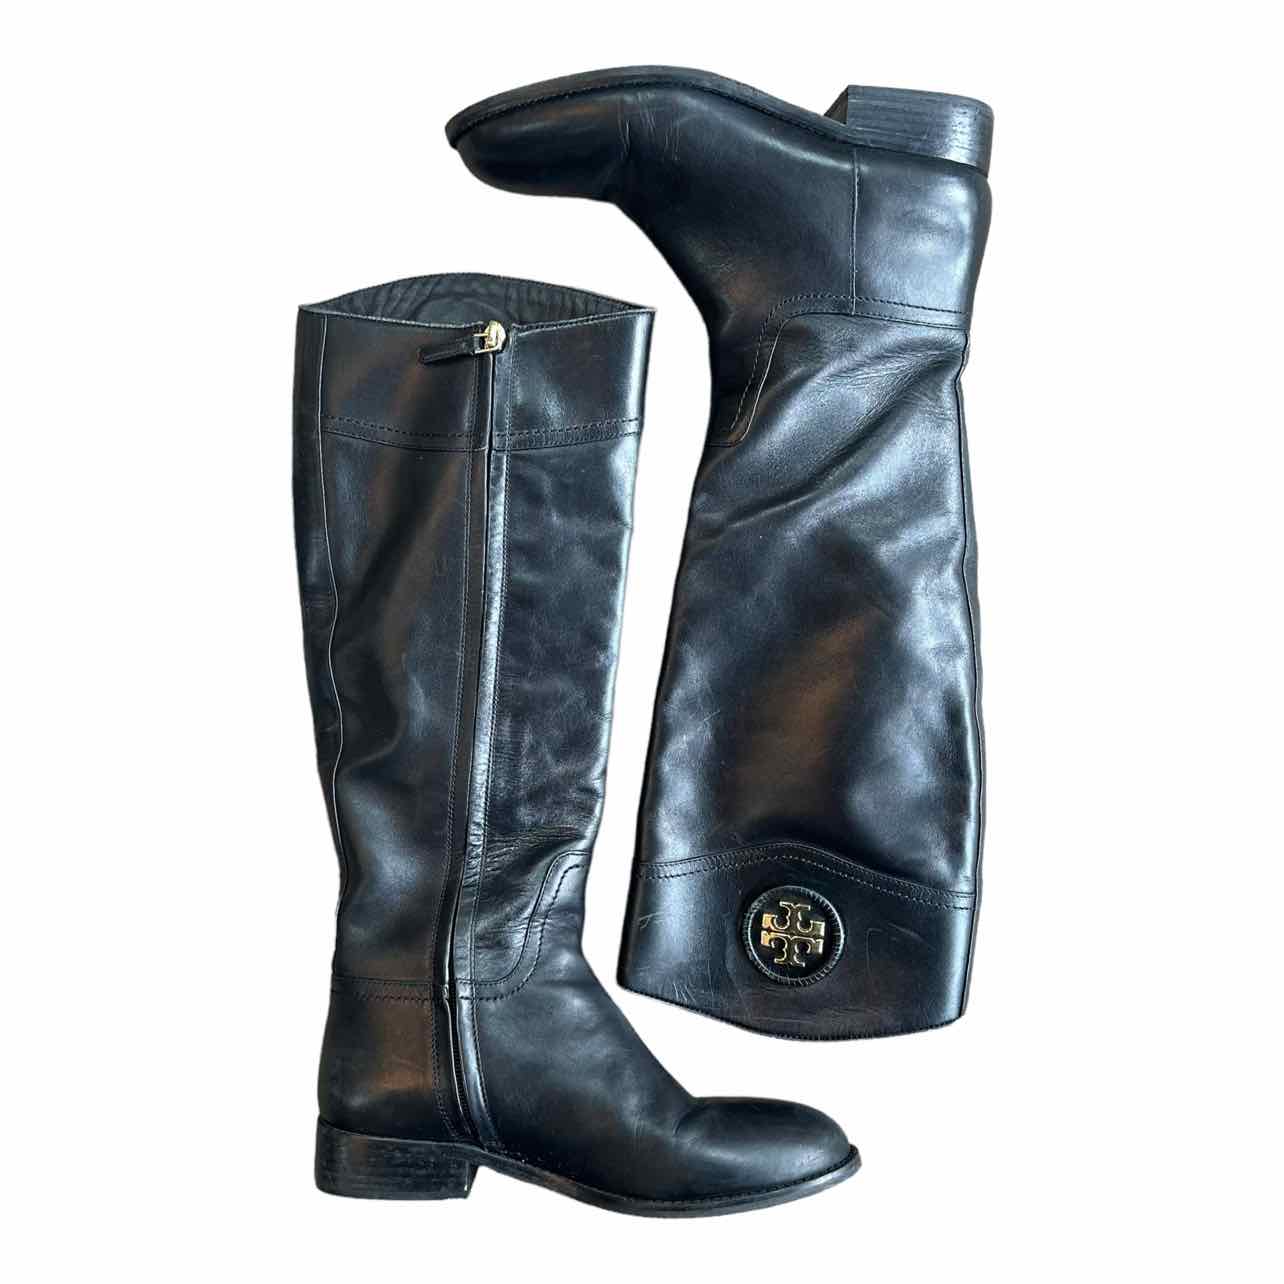 Tory Burch SIZE 8 Boots